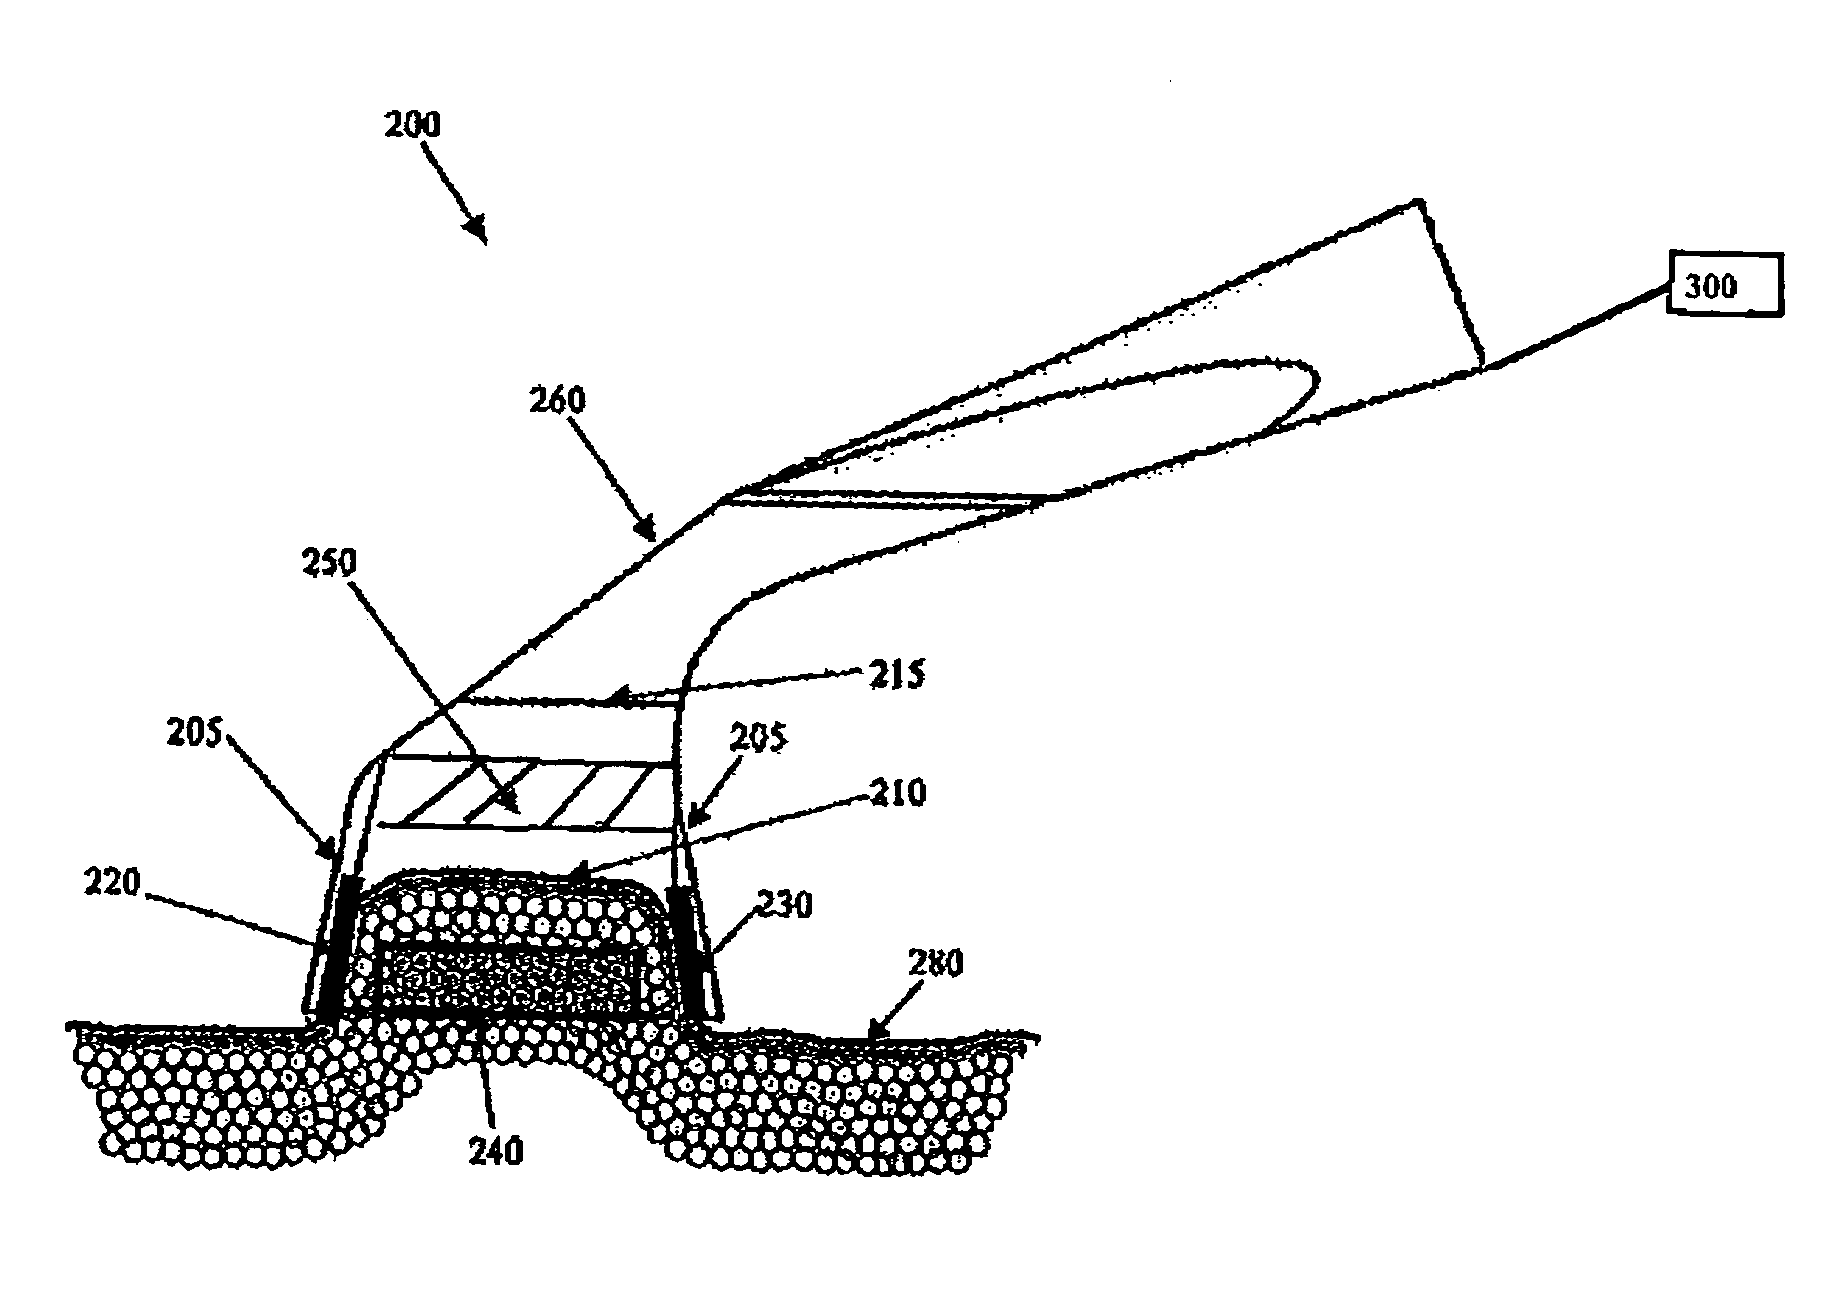 System and method for treating tissue